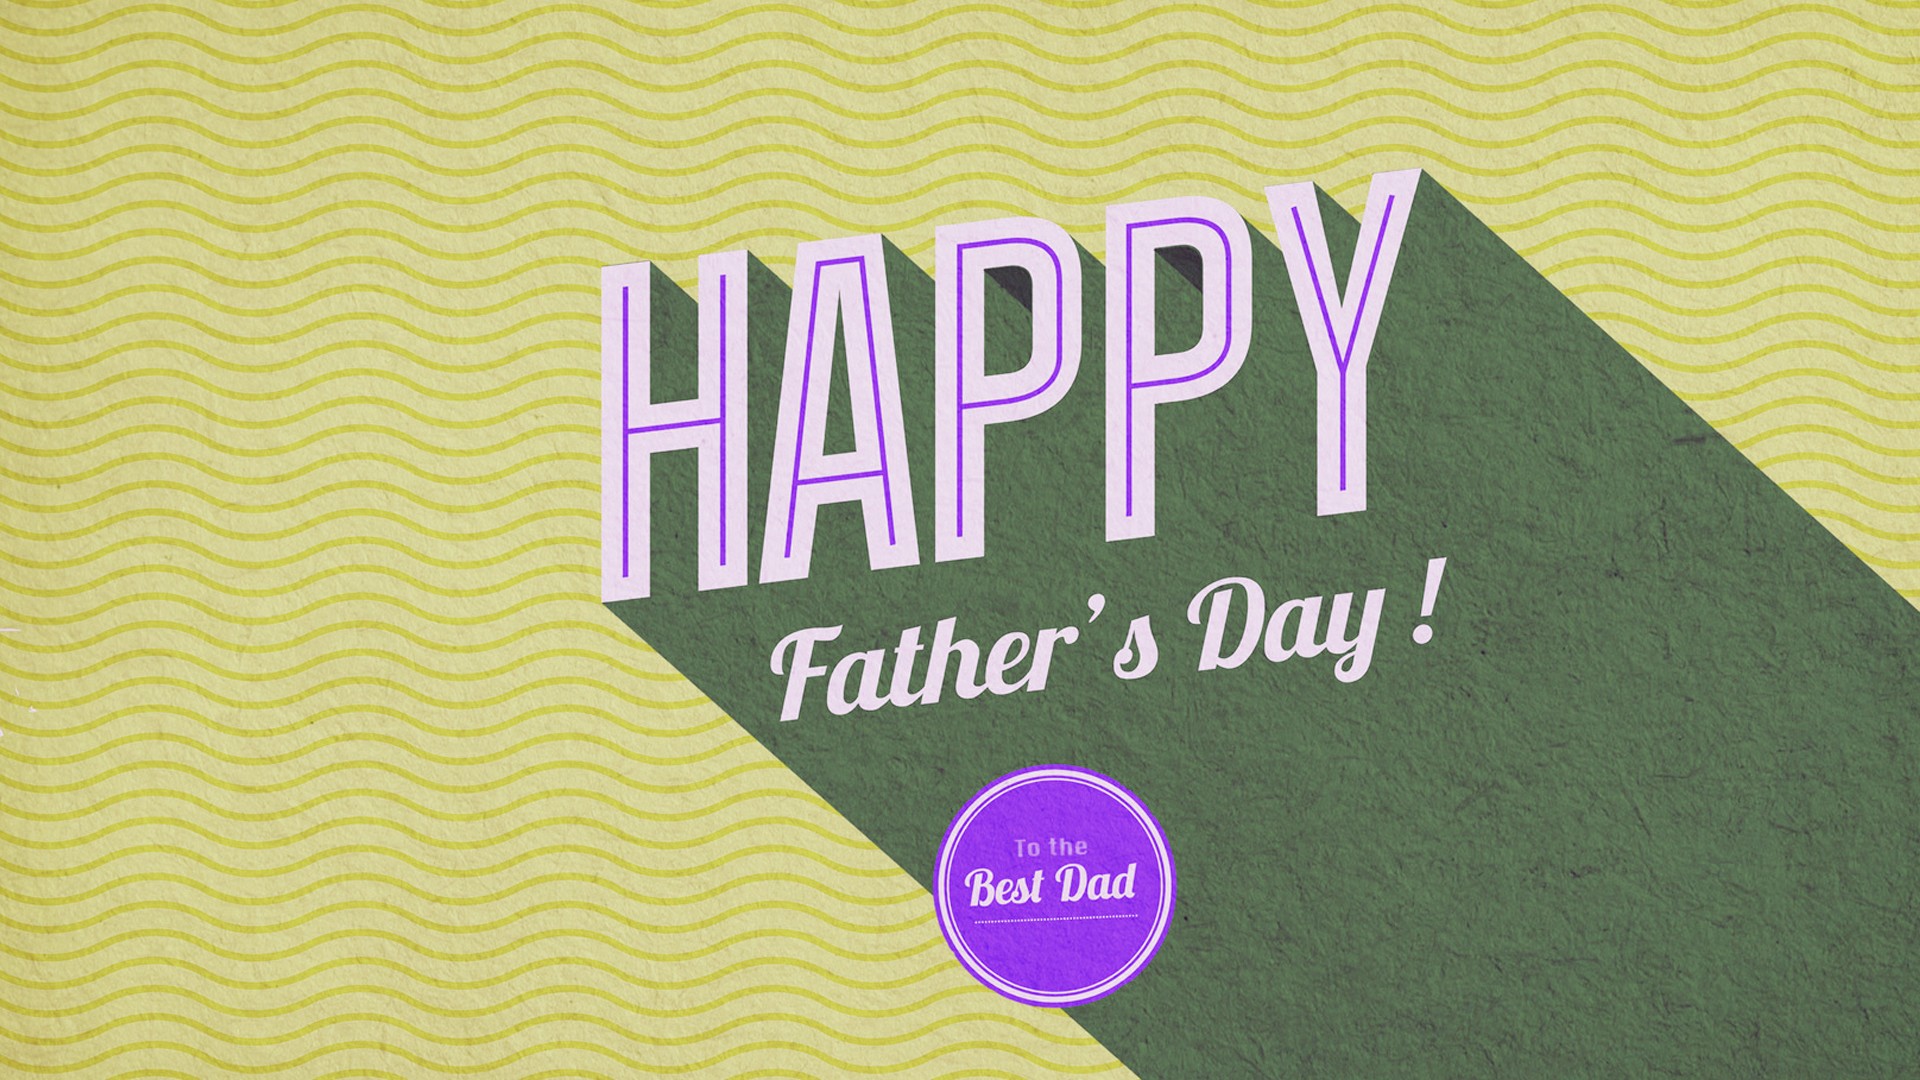 Happy-Fathers-Day-2015